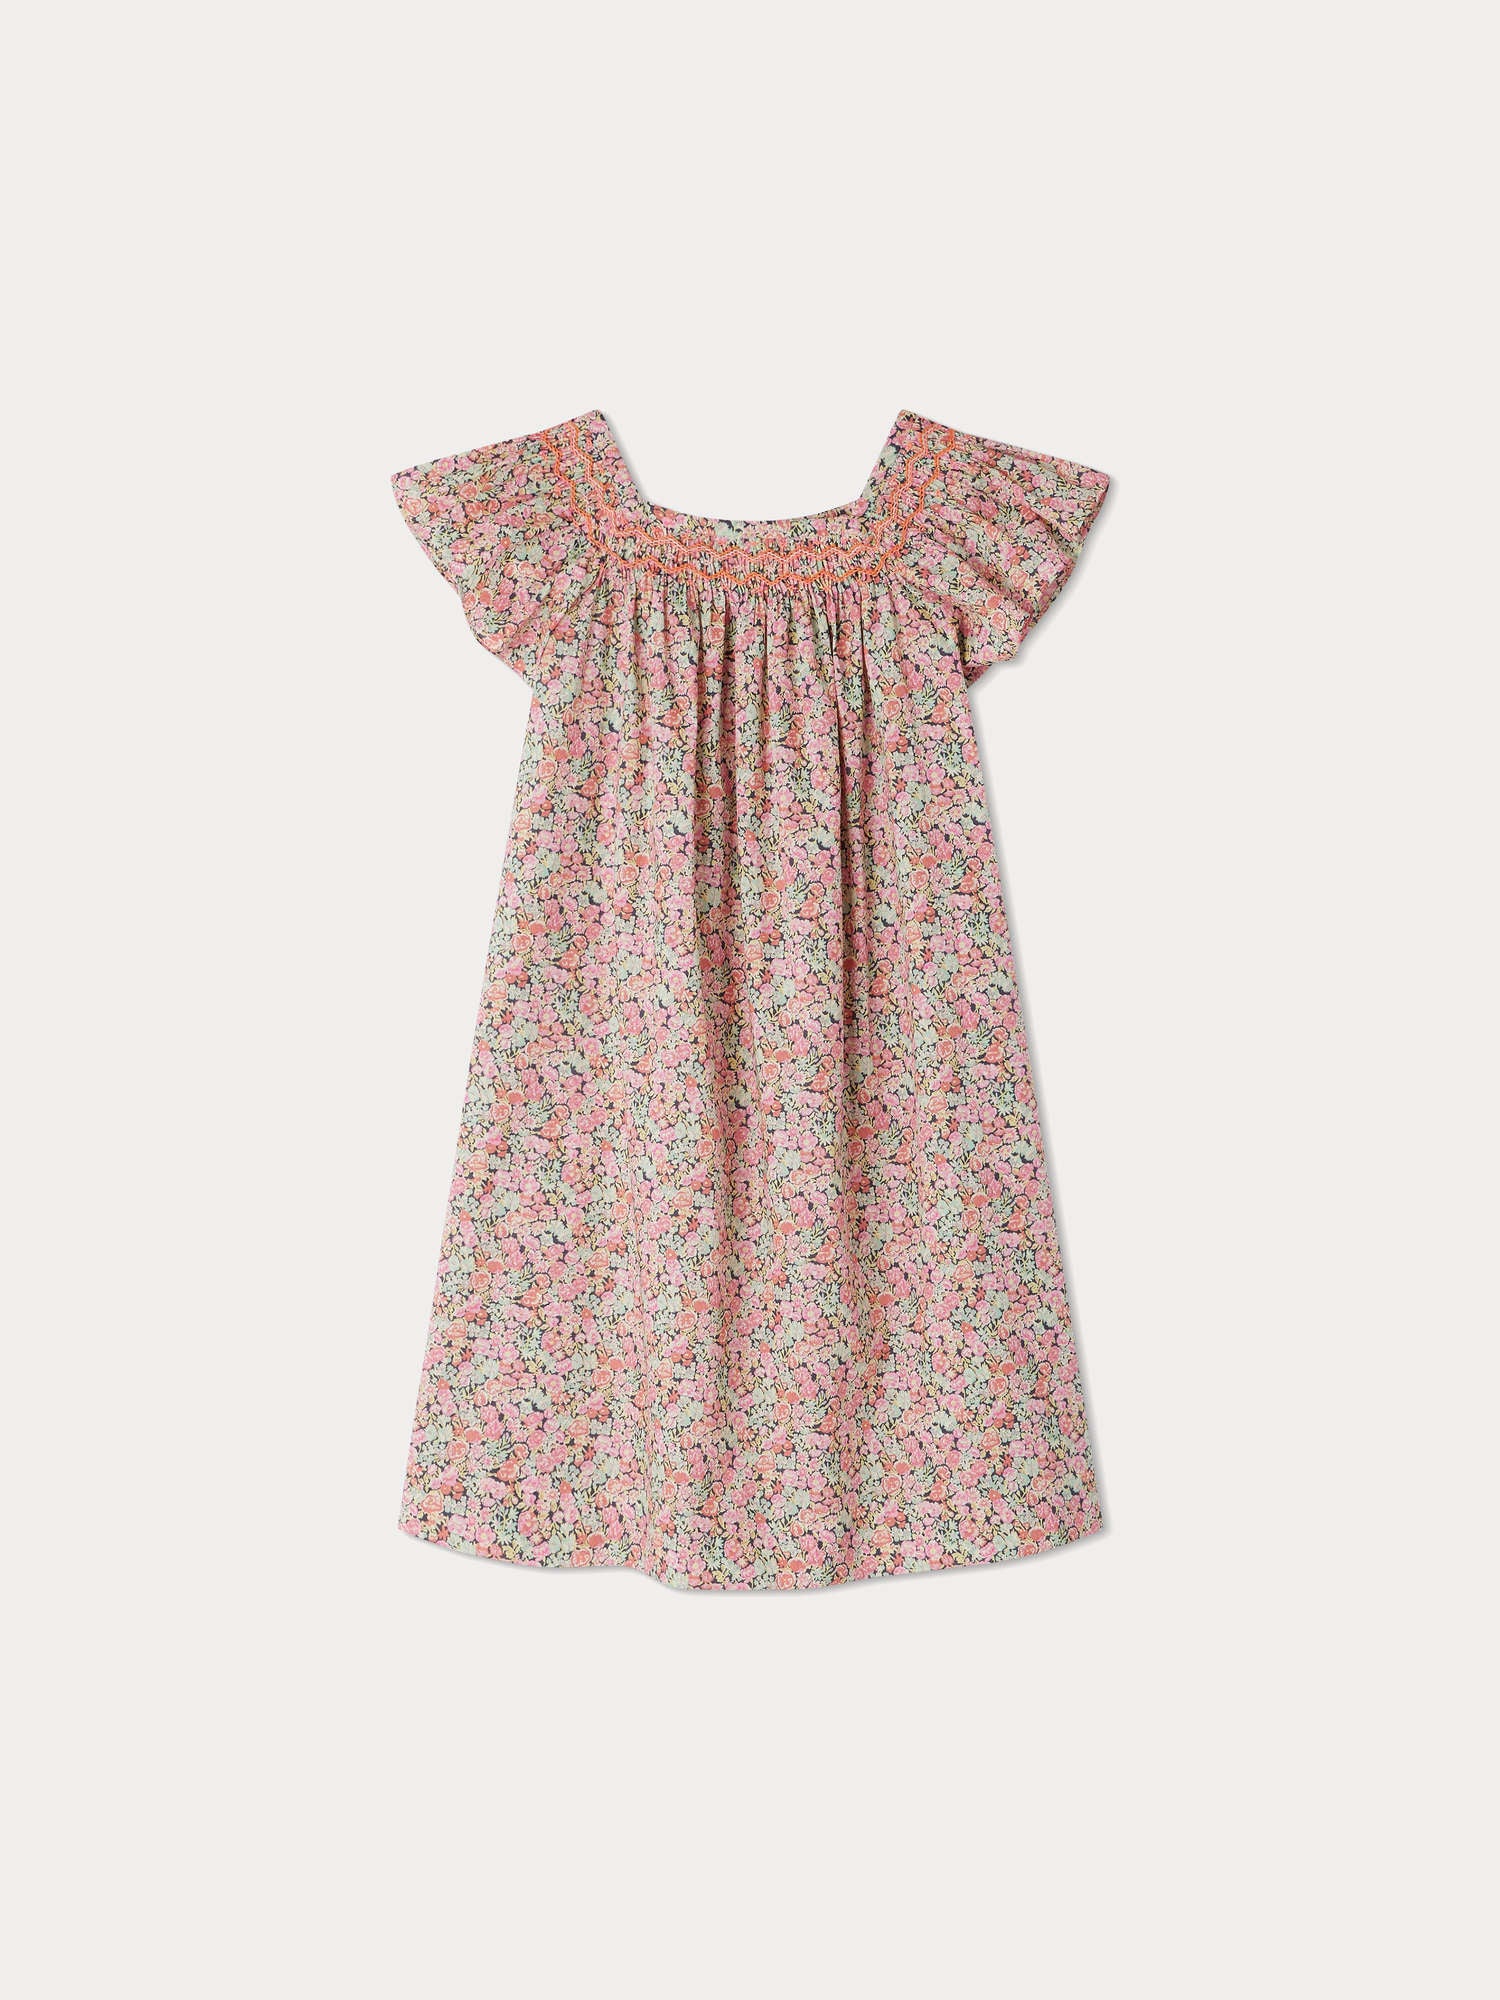 BONPOINT ボンポワン ドレス S03GBLW00017 503A ガールズ FLORAL-PRINTED DRESS WITH RUCHED  DETAIL dk 66％以上節約 - ドレス